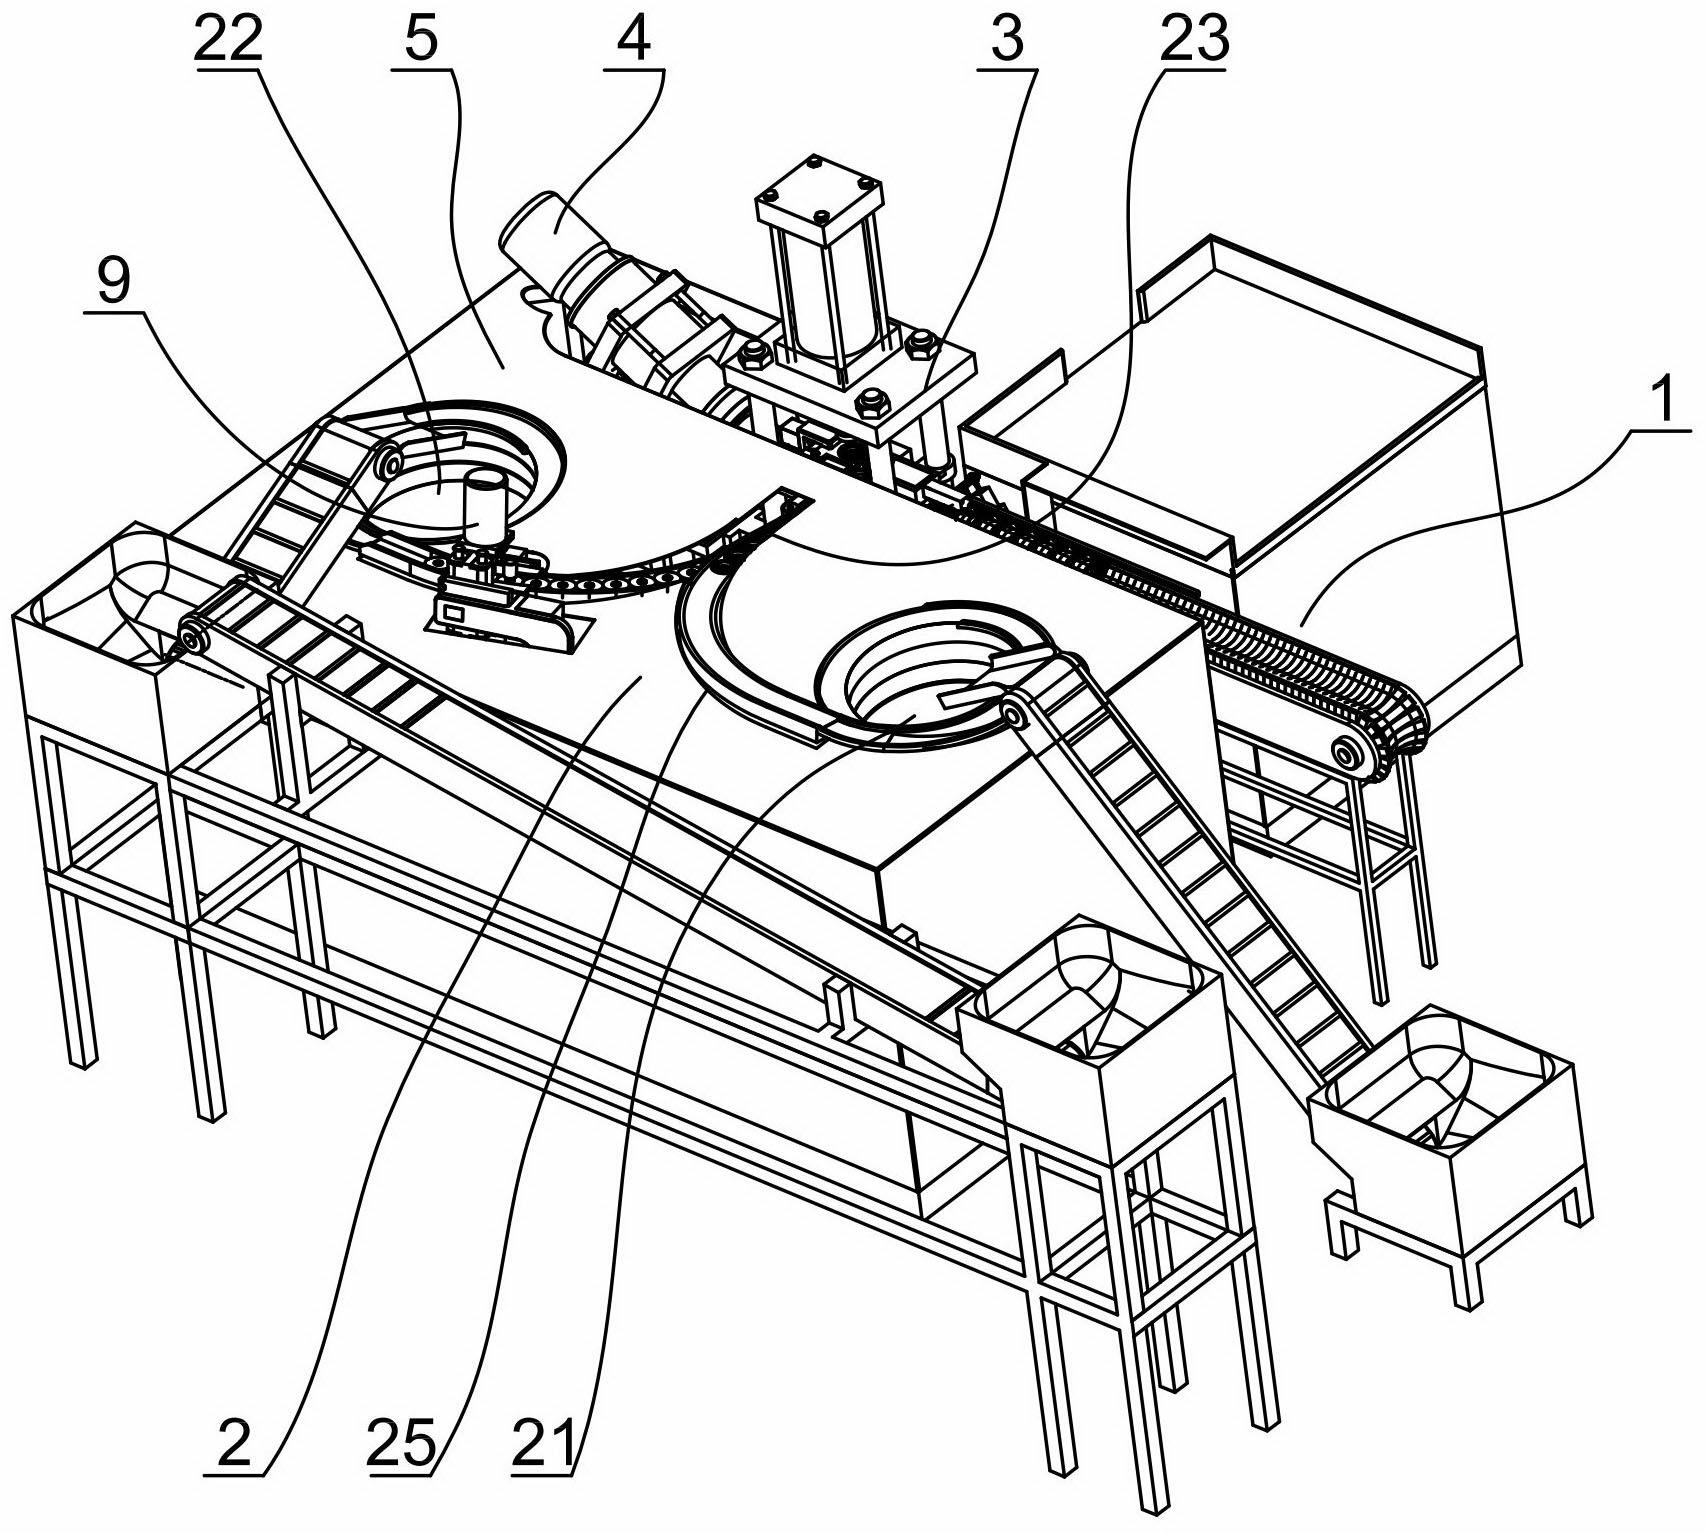 Novel automatic assembly spinning and reverting device